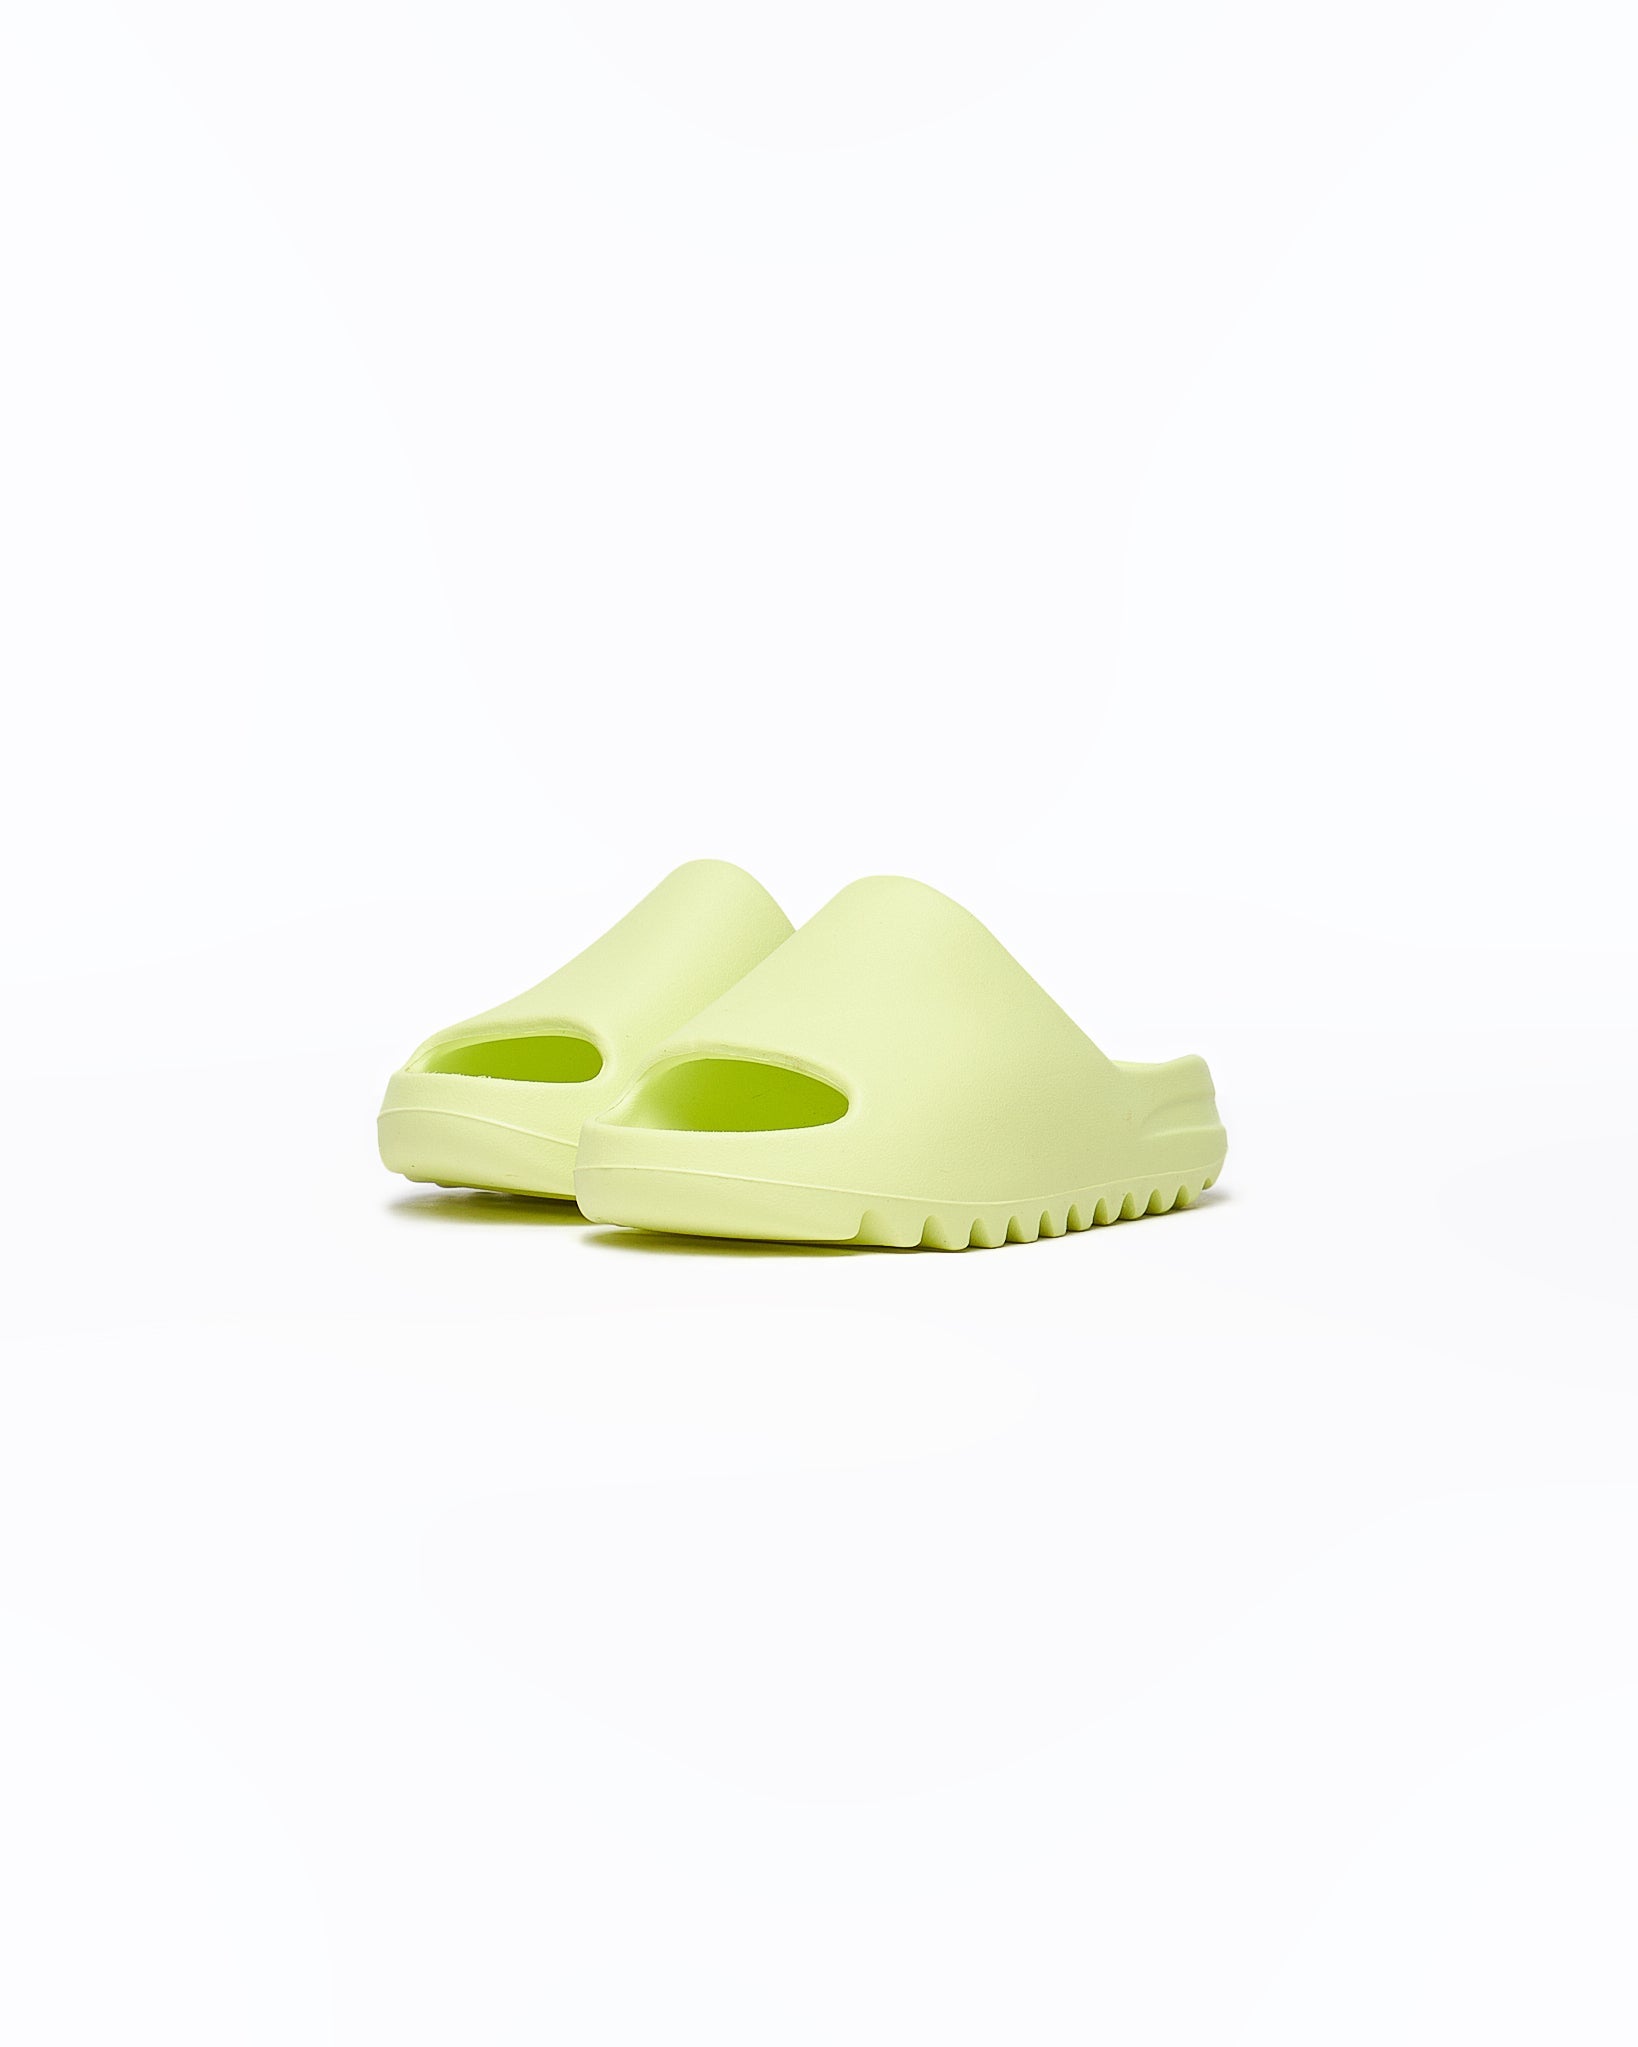 MOI OUTFIT-ADI Yeezy Lady Neon Slide 38.90